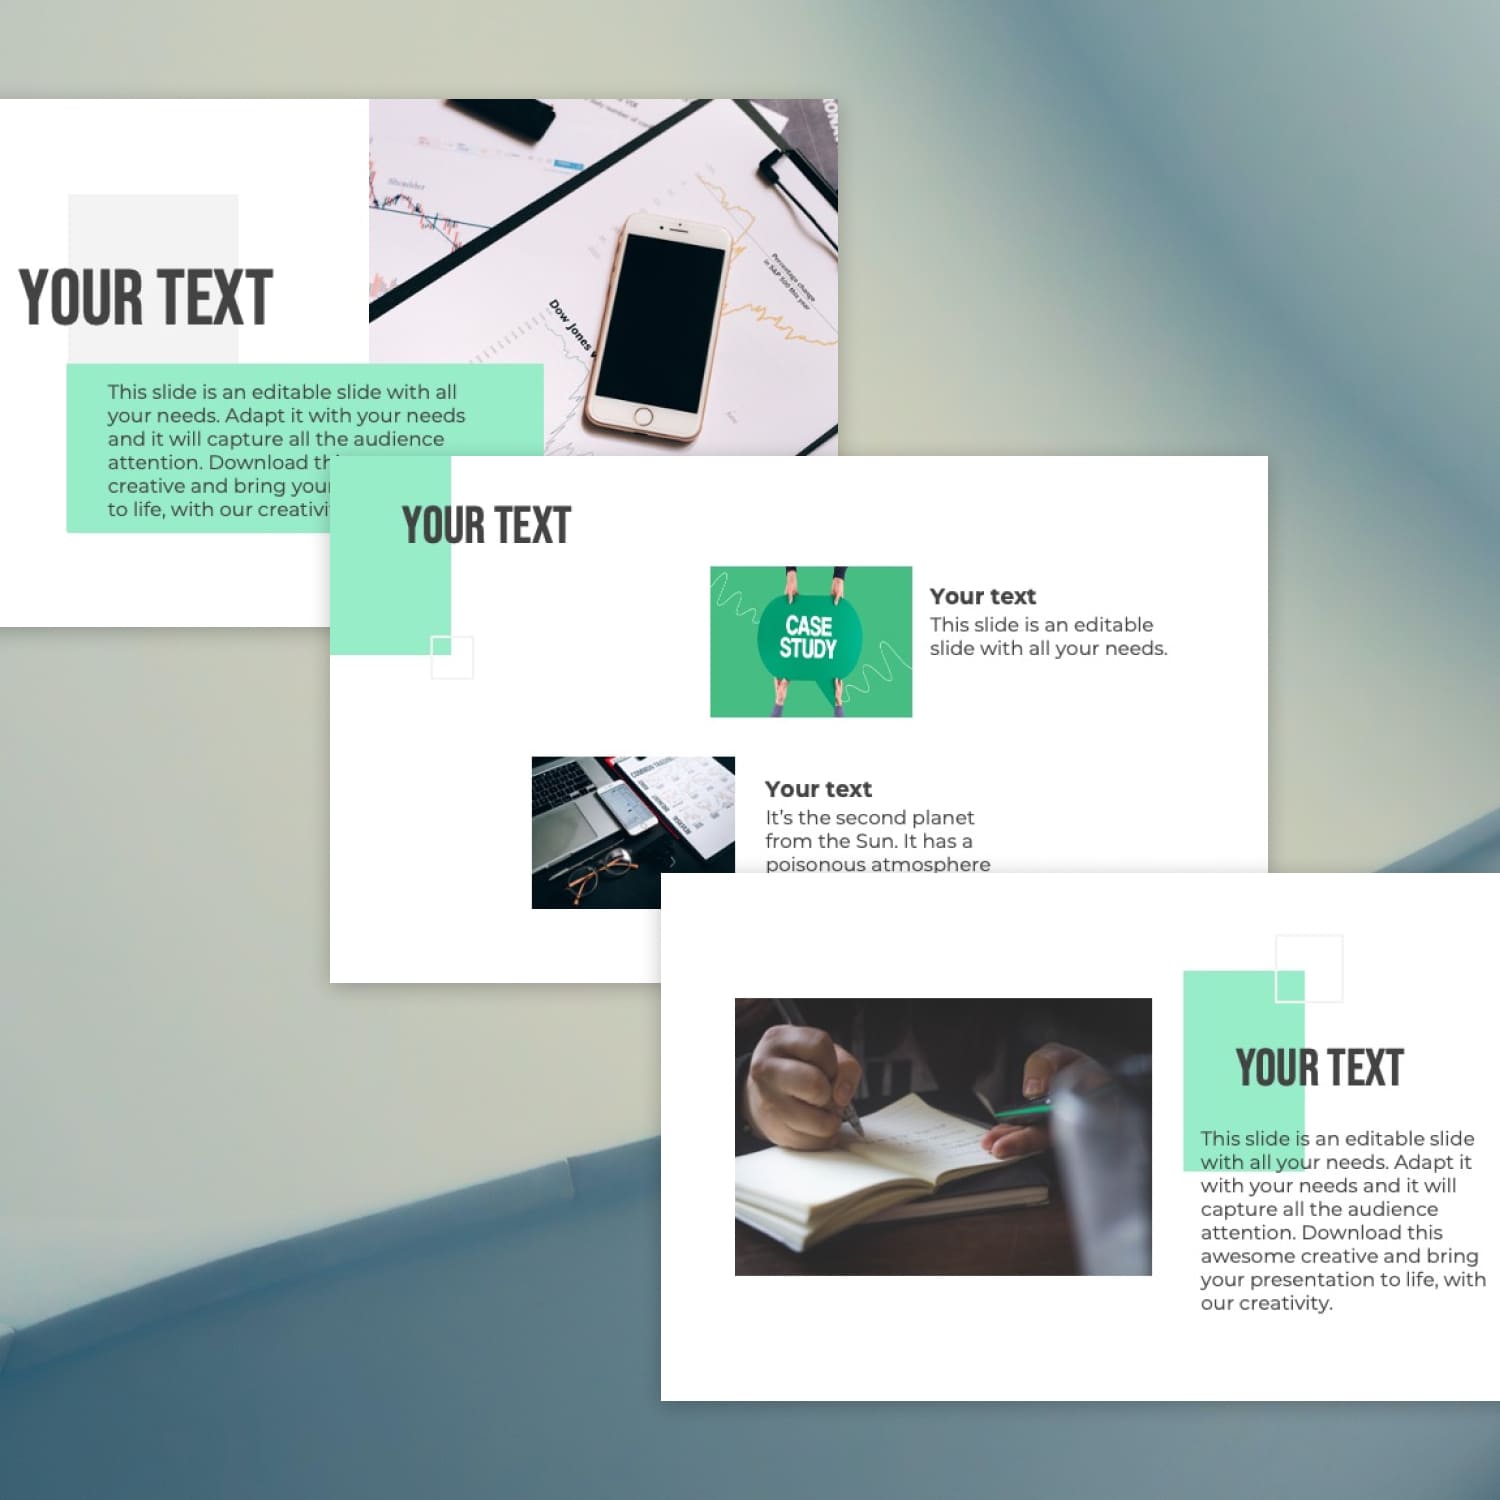 Case study powerpoint template created by MasterbundlesFreebies.